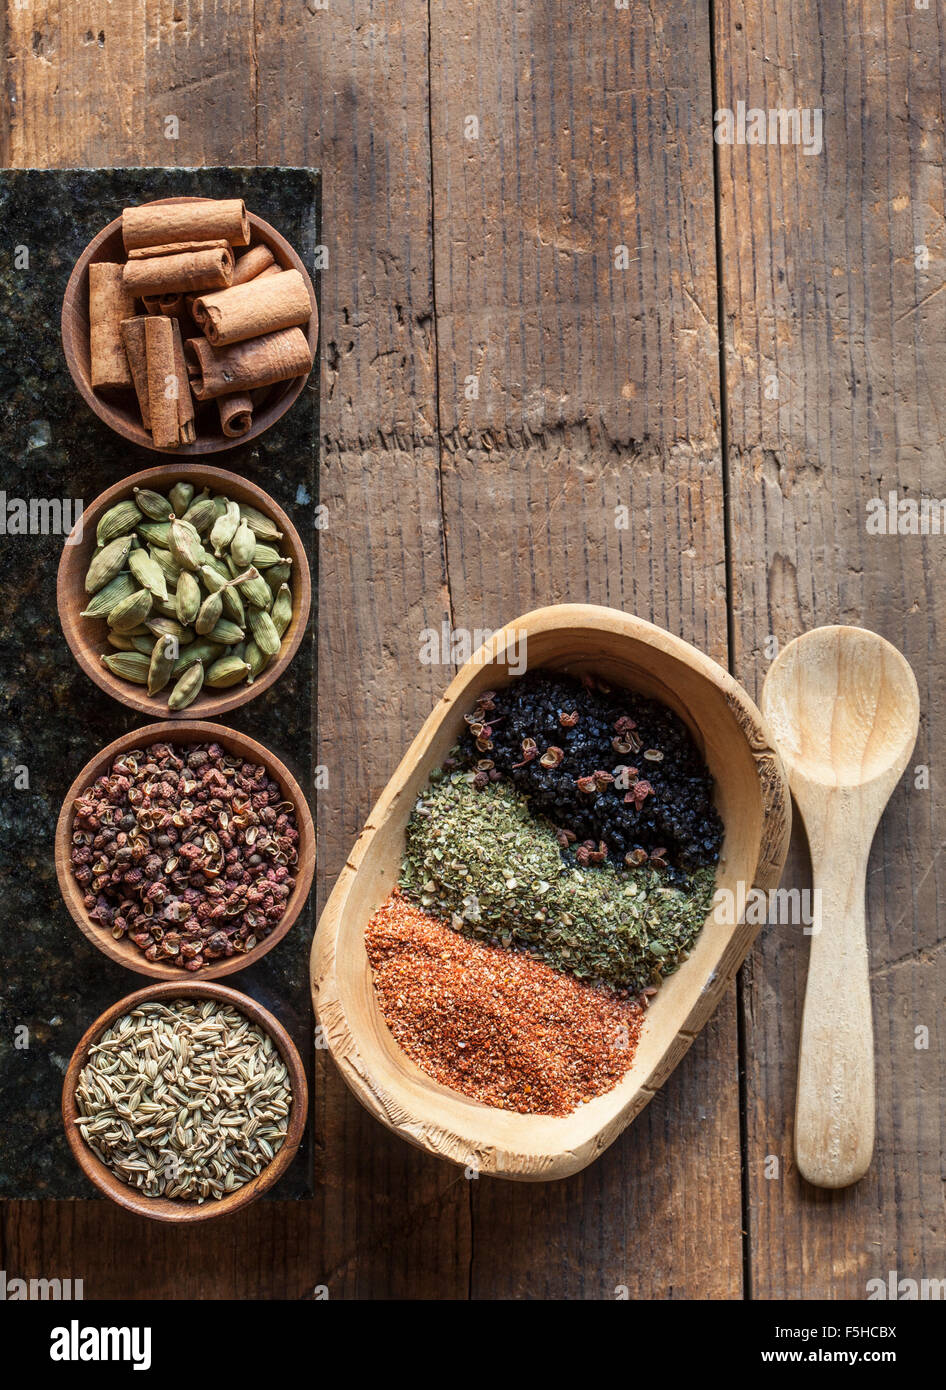 Various spices in small wooden bowls with spice mixtures on rustic wood with a wooden spoon Stock Photo